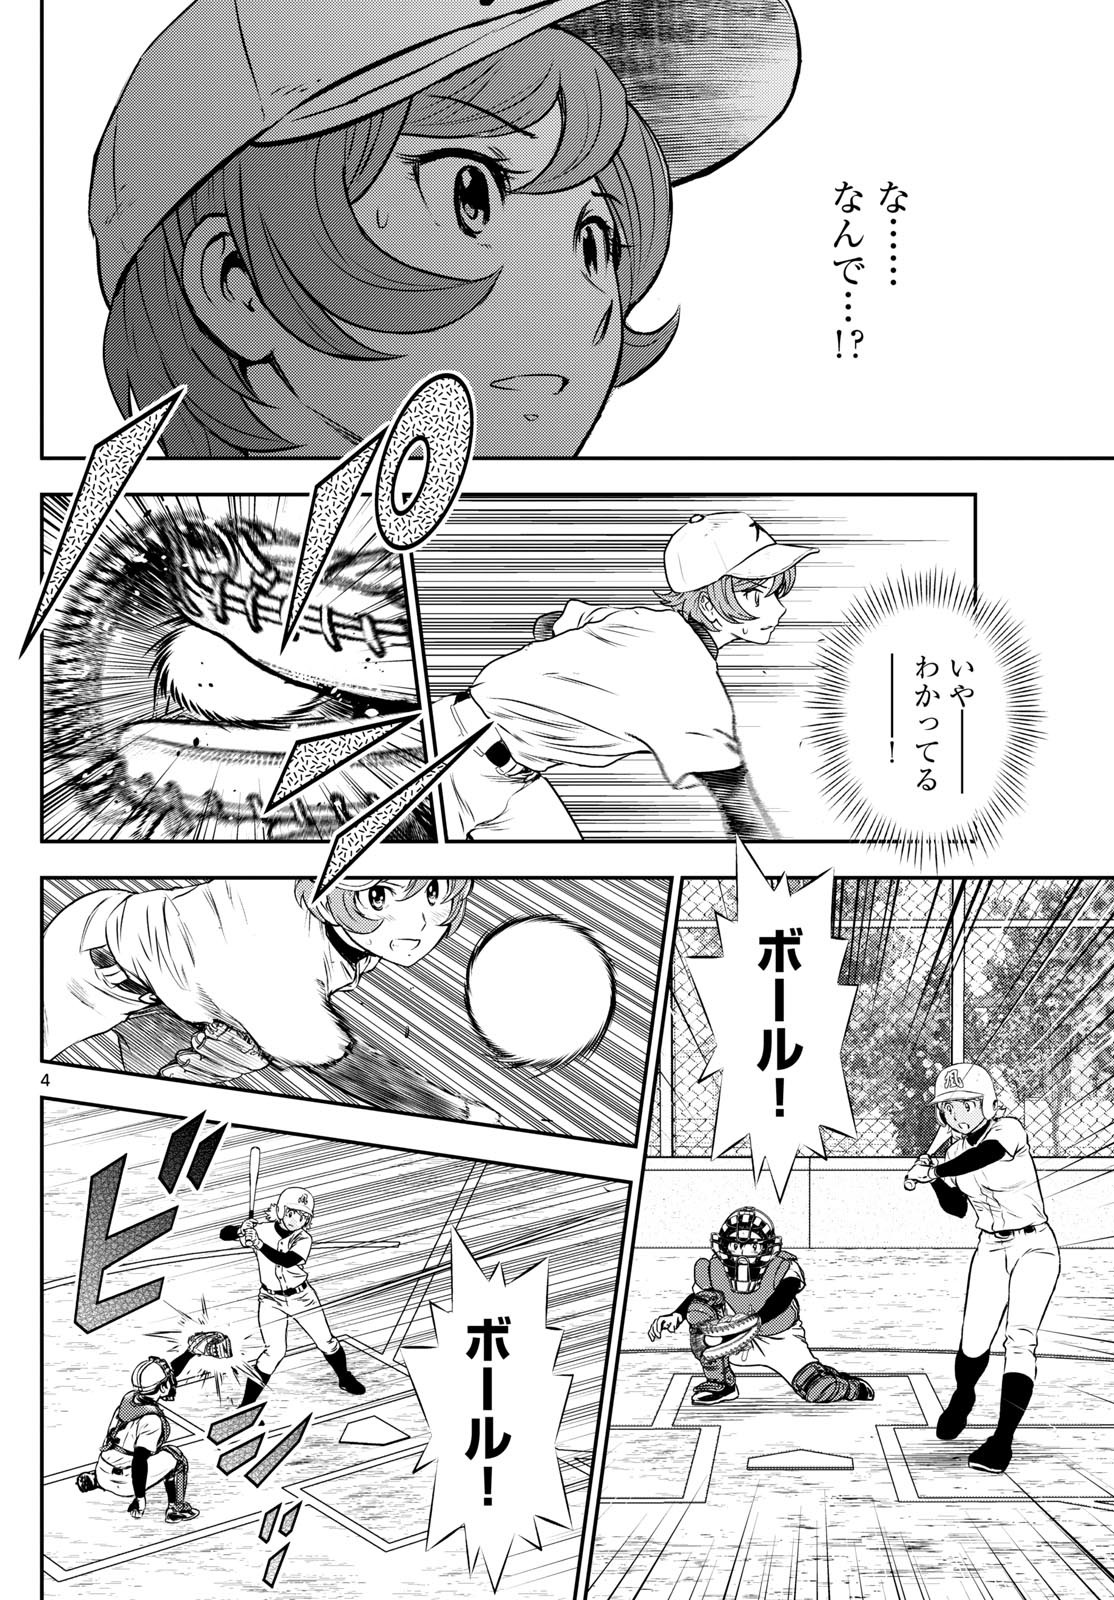 Major 2nd - メジャーセカンド - Chapter 281 - Page 4